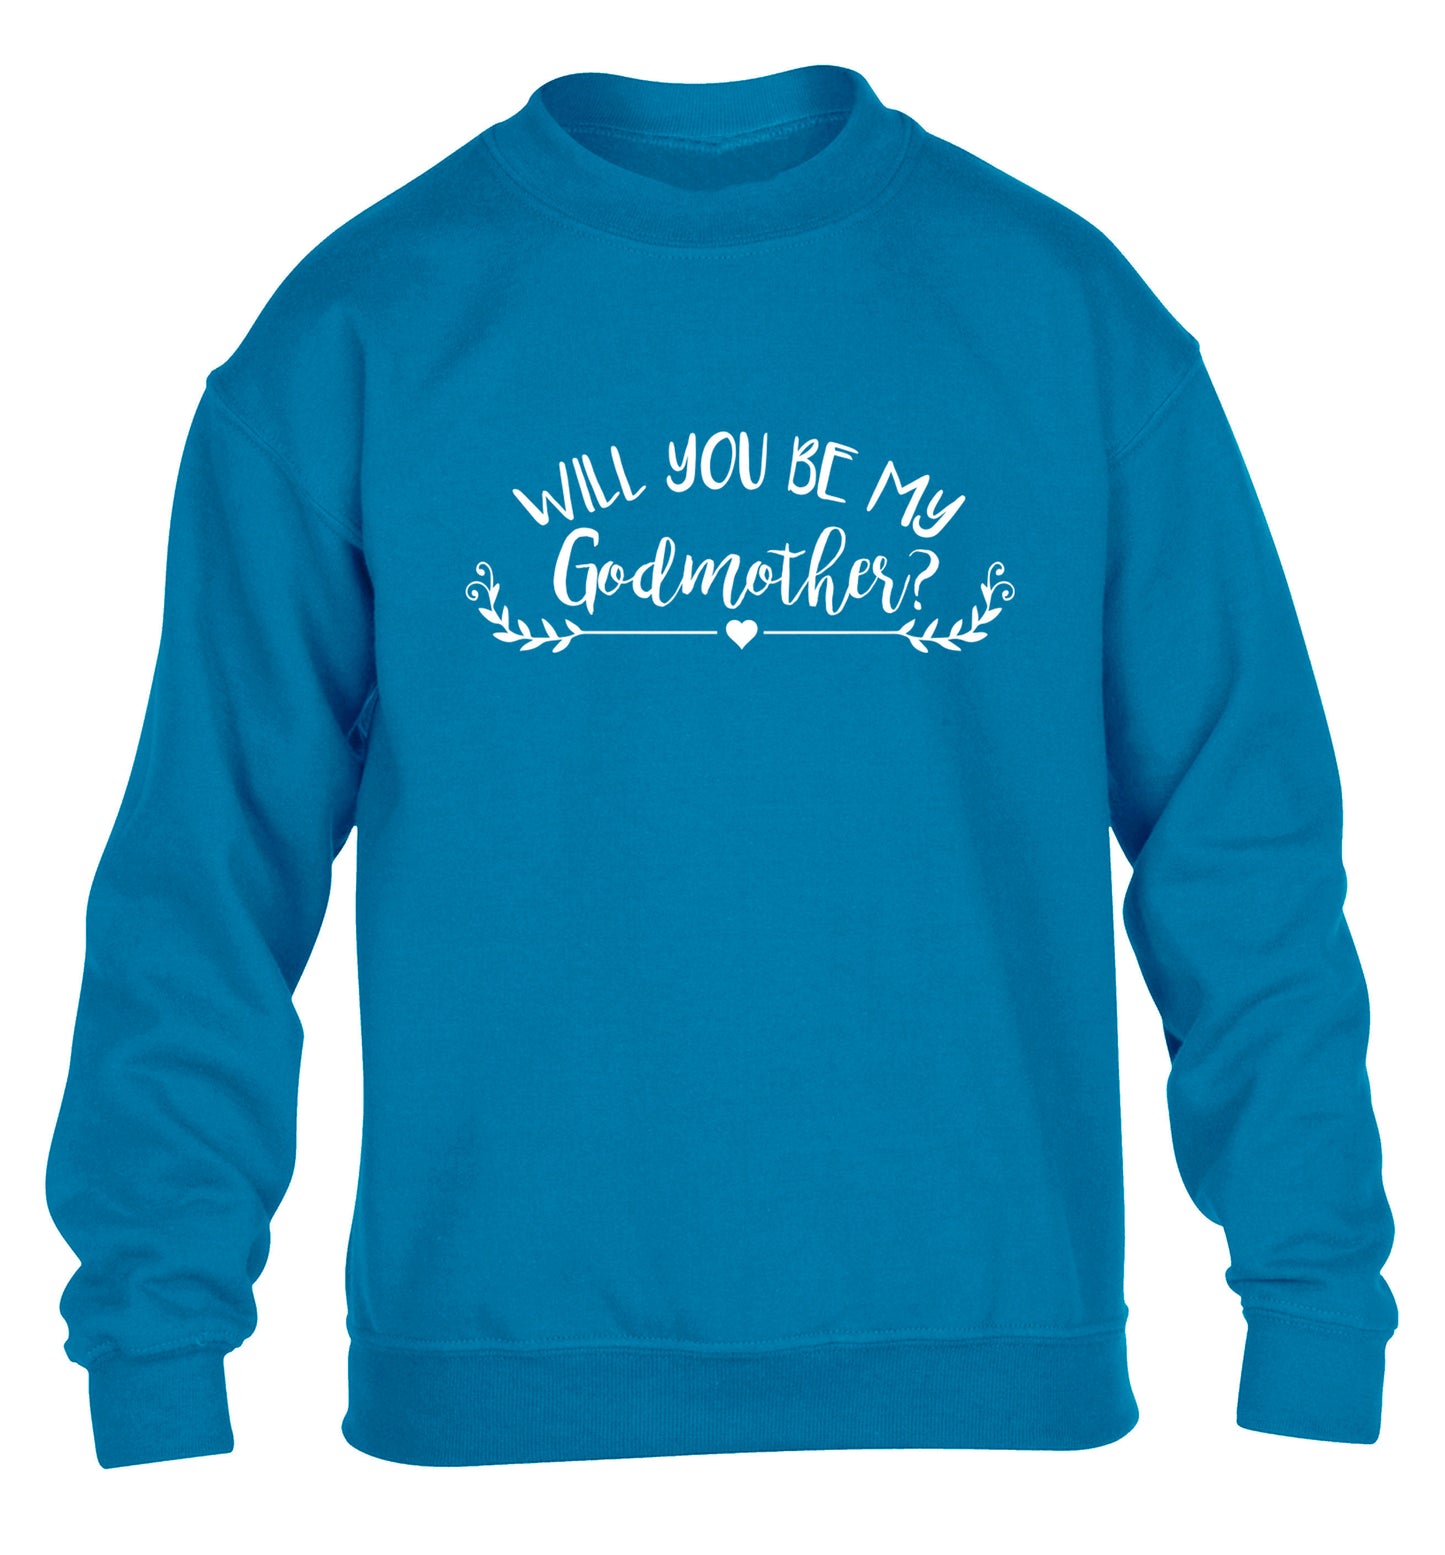 Will you be my godmother? children's blue sweater 12-14 Years